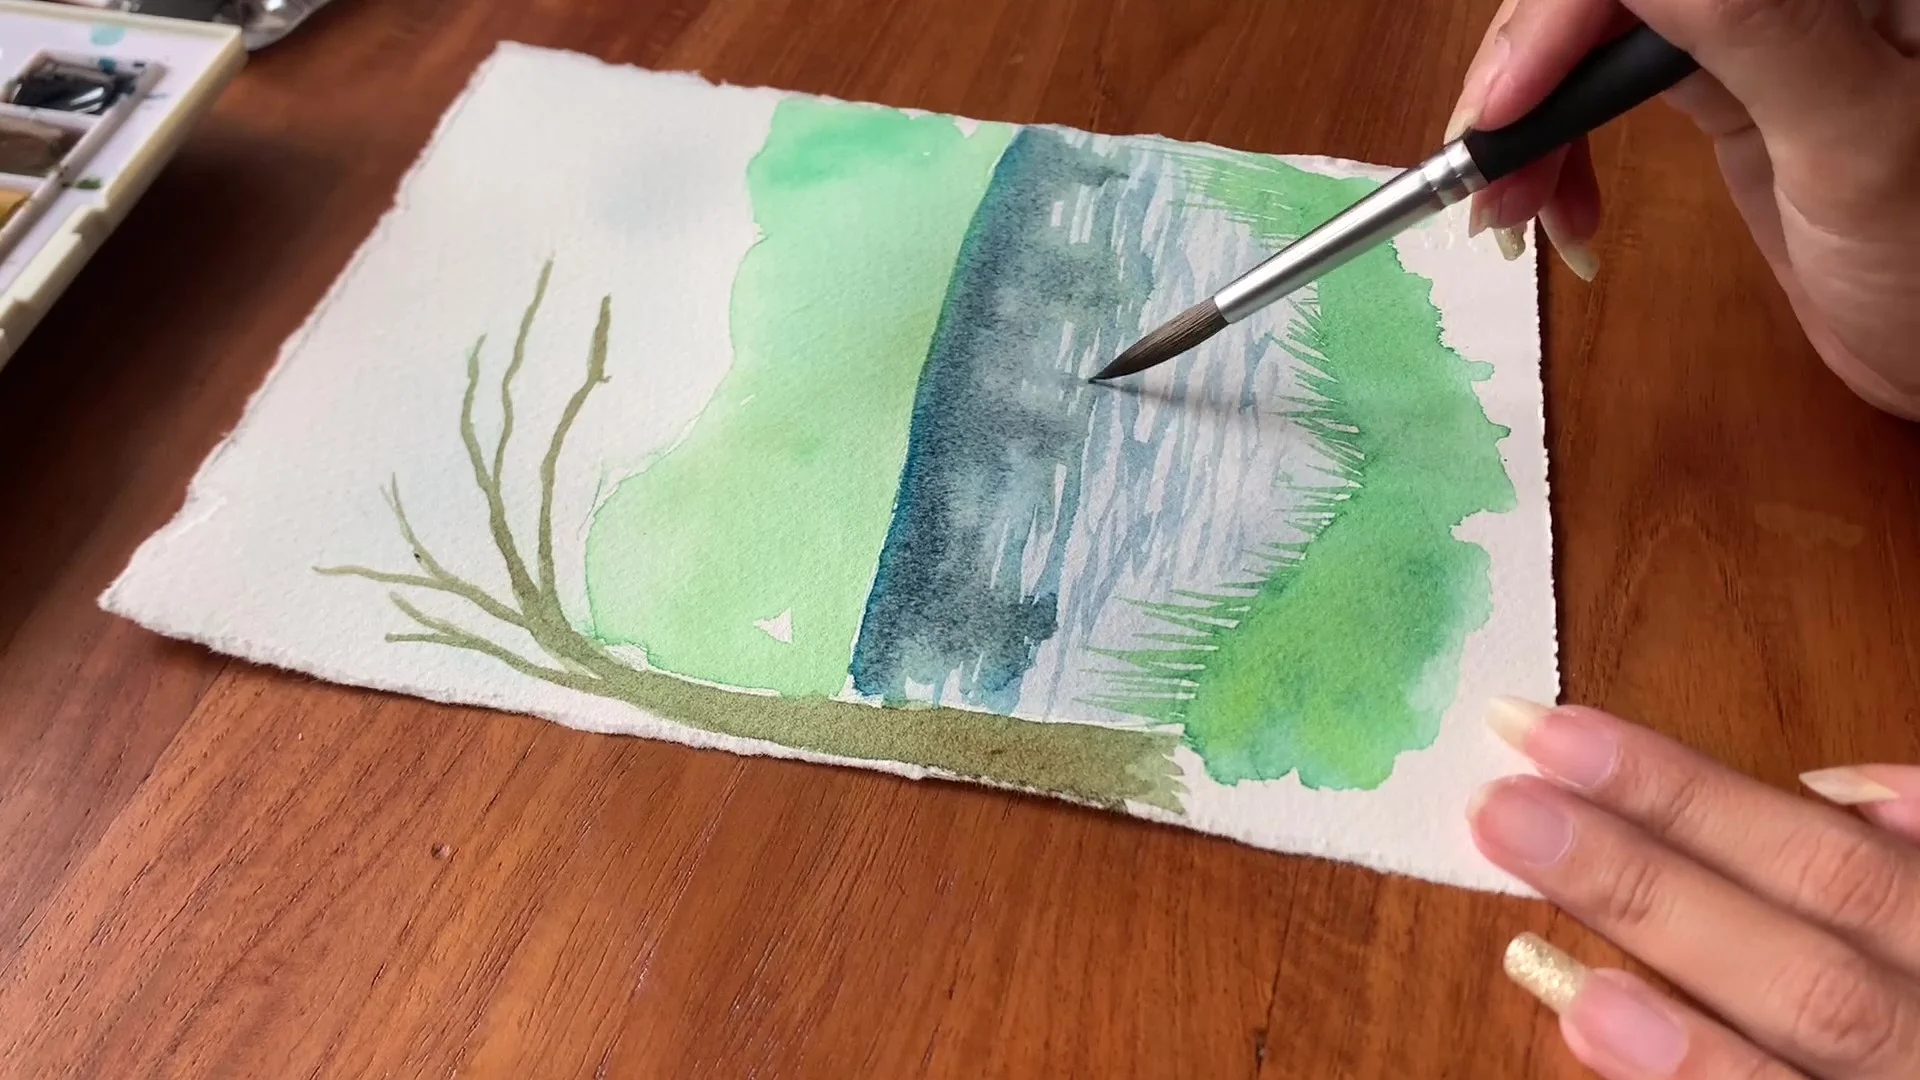 Painting The Second Layer Of The Lake